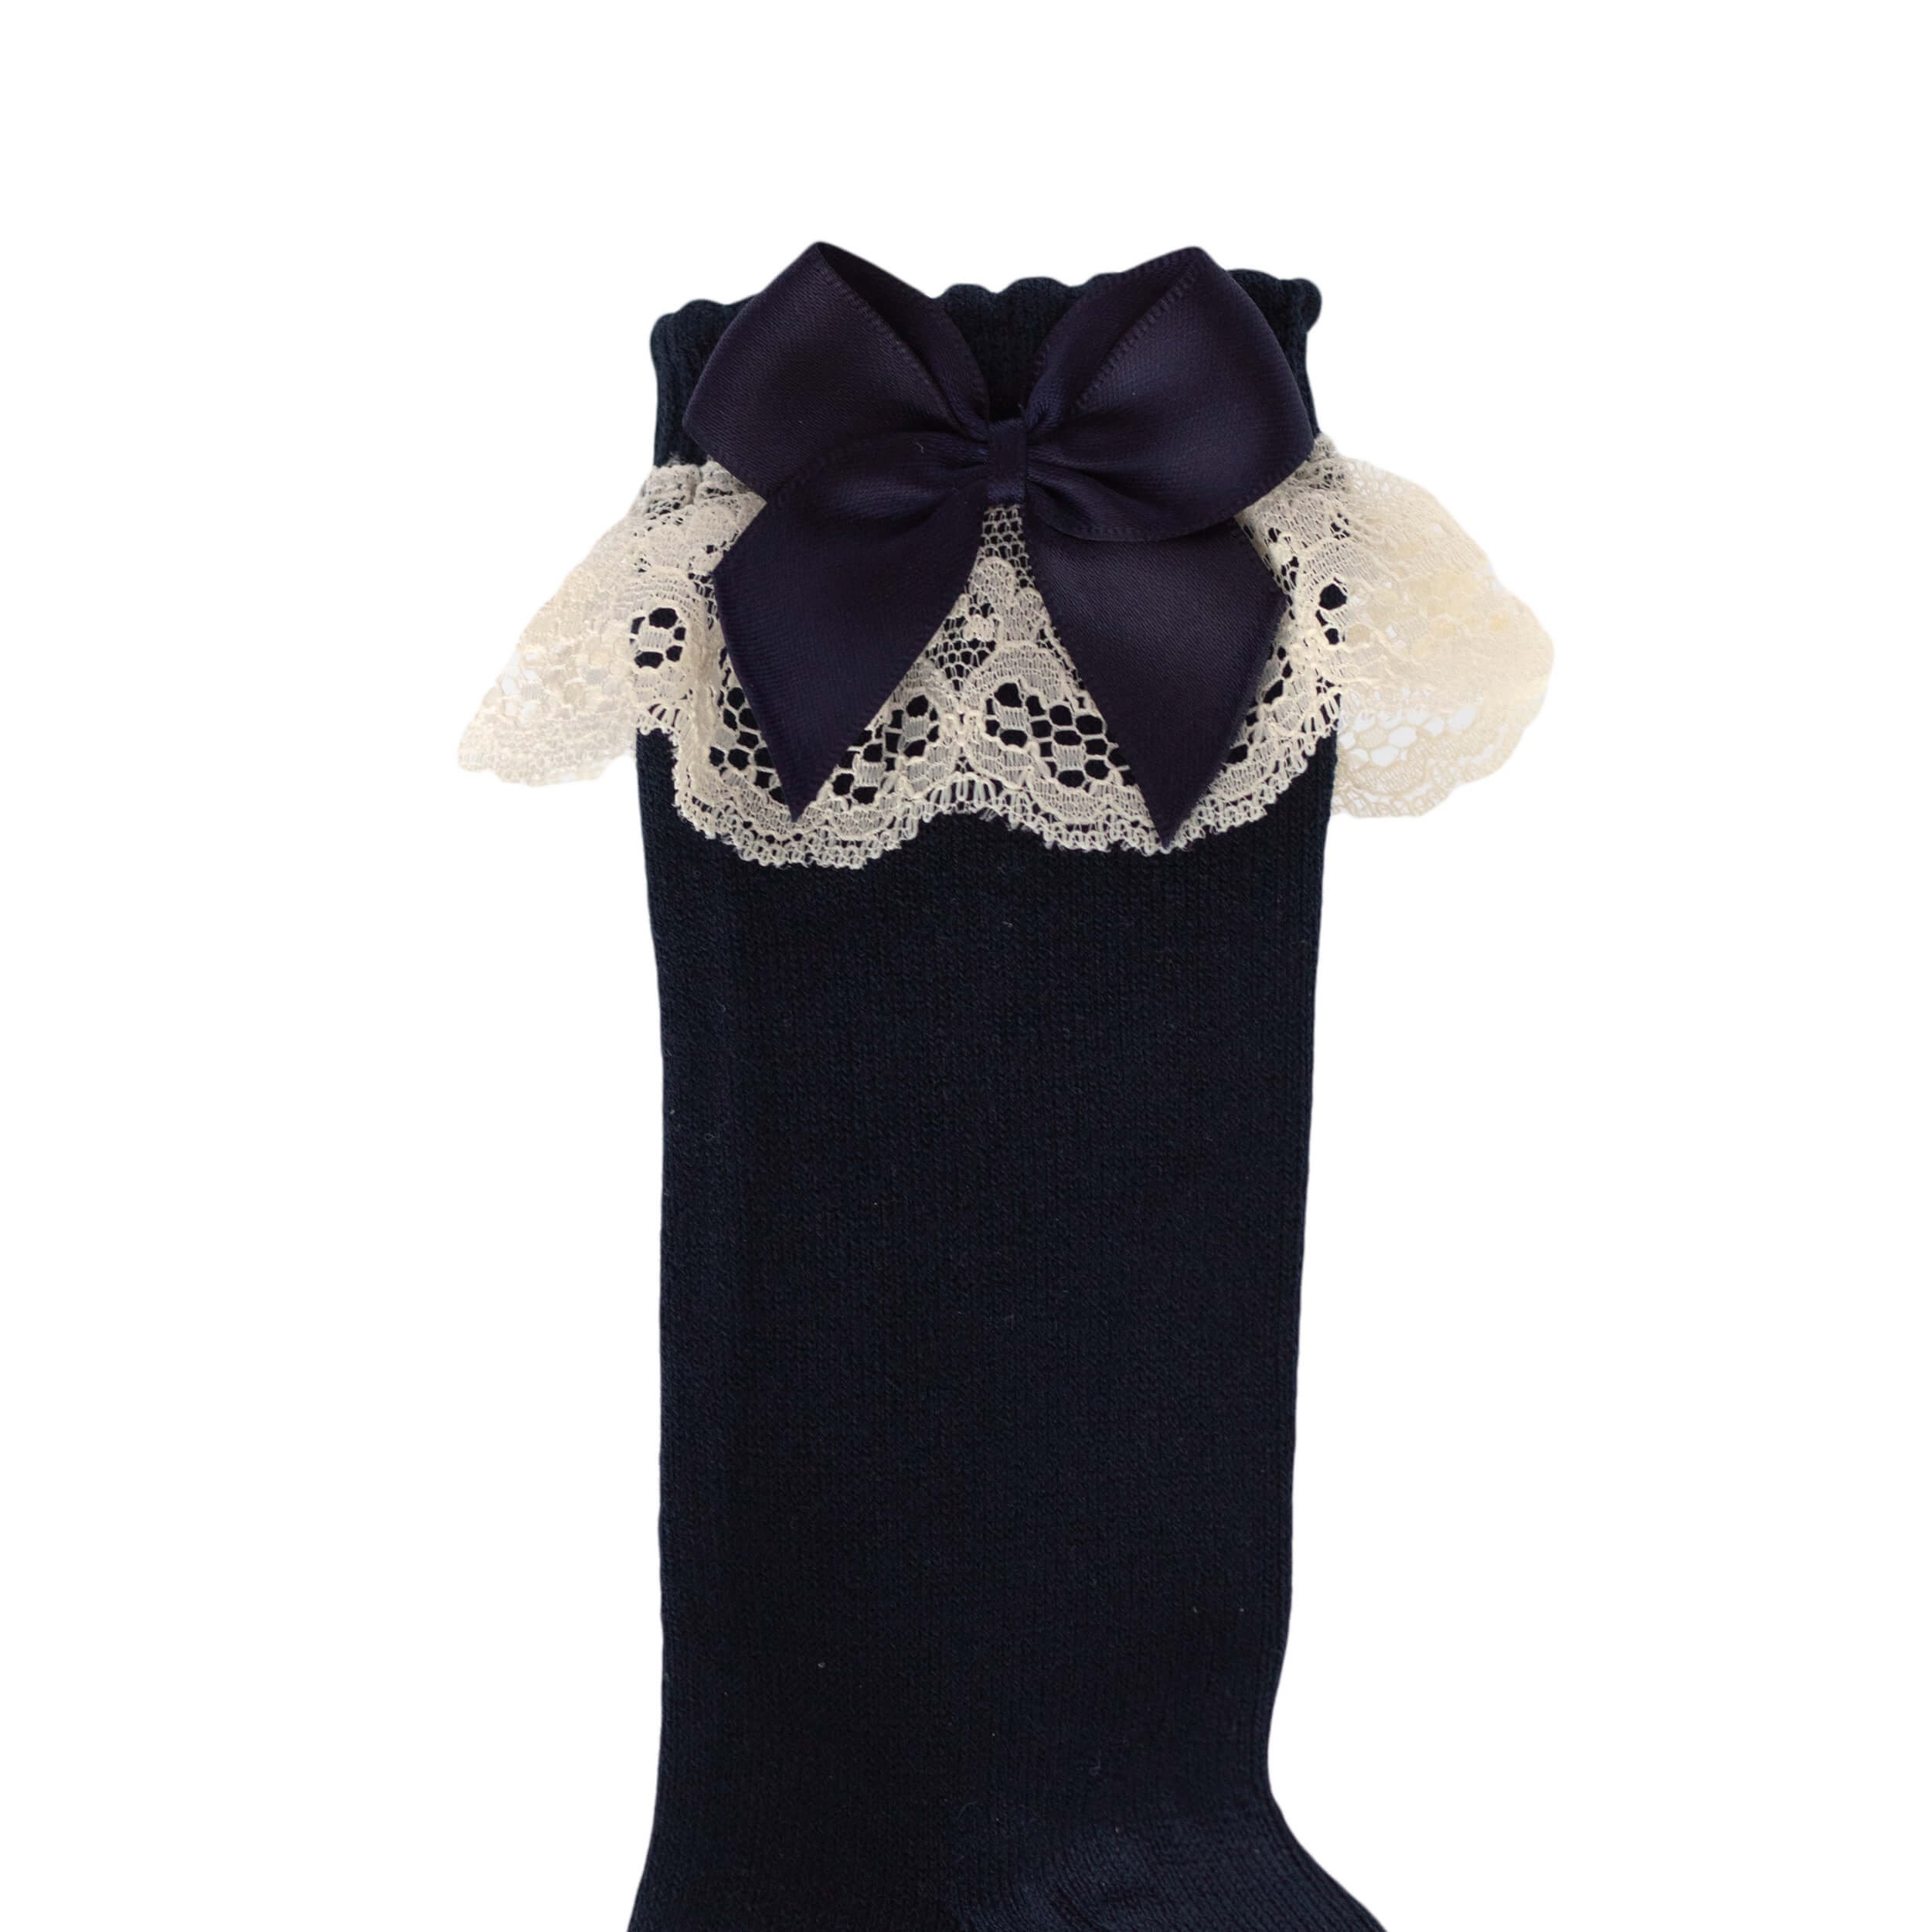 Spanish girls knee sock with lace, navy